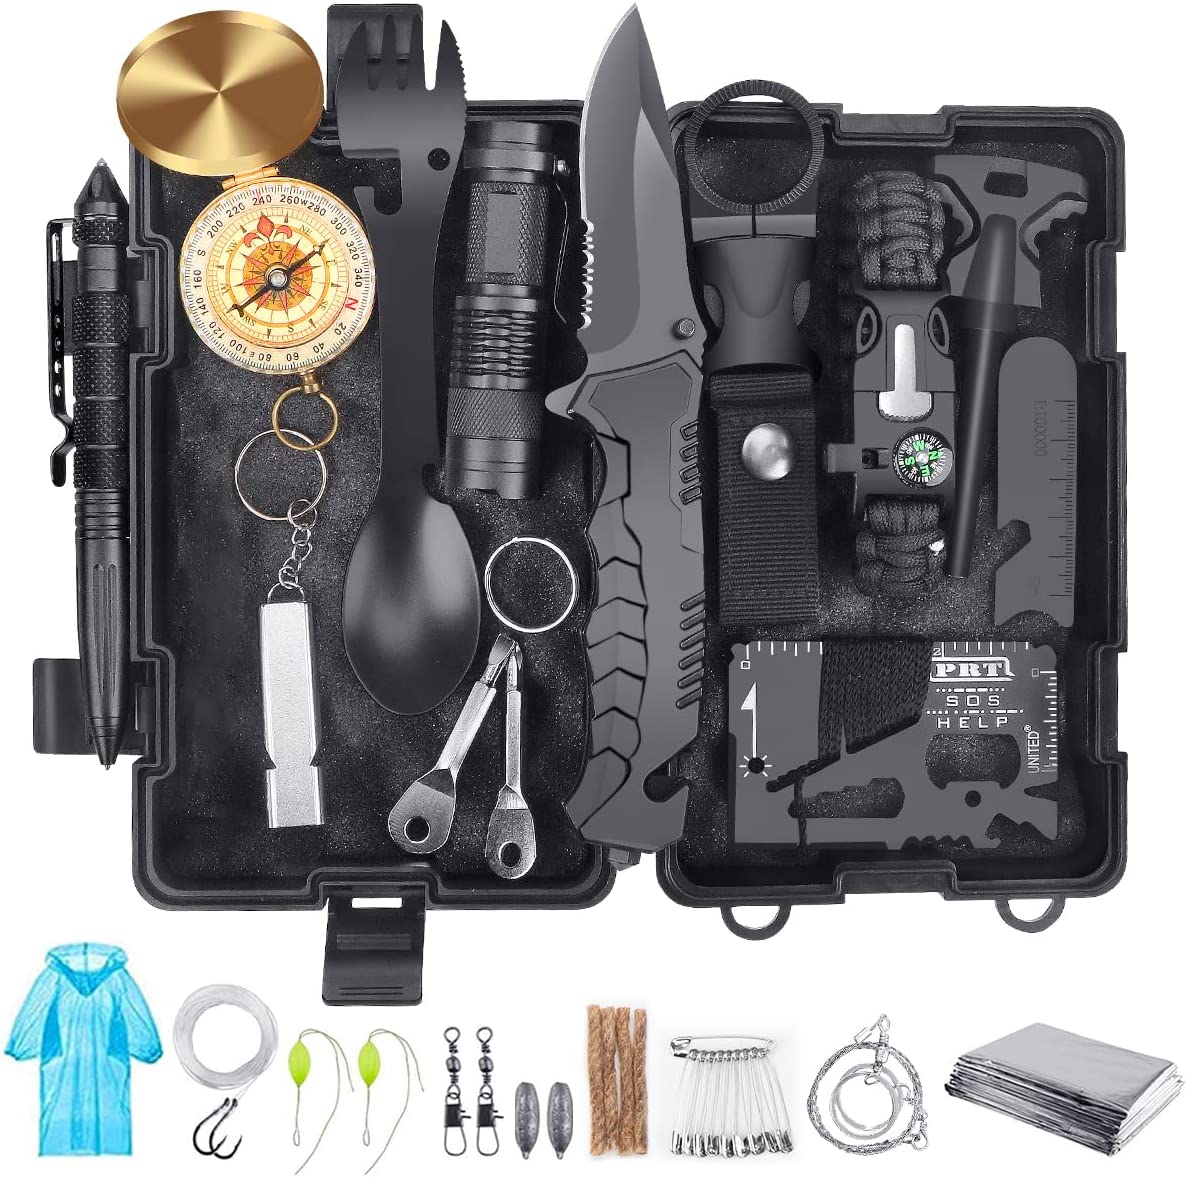 Gifts for Men Dad Husband Him, Survival Kits 33 in 1, Survival Gear and Equipment, Christmas Stocking Stuffers for Families Outdoors Camping Hiking Adventures Cool Gadgets